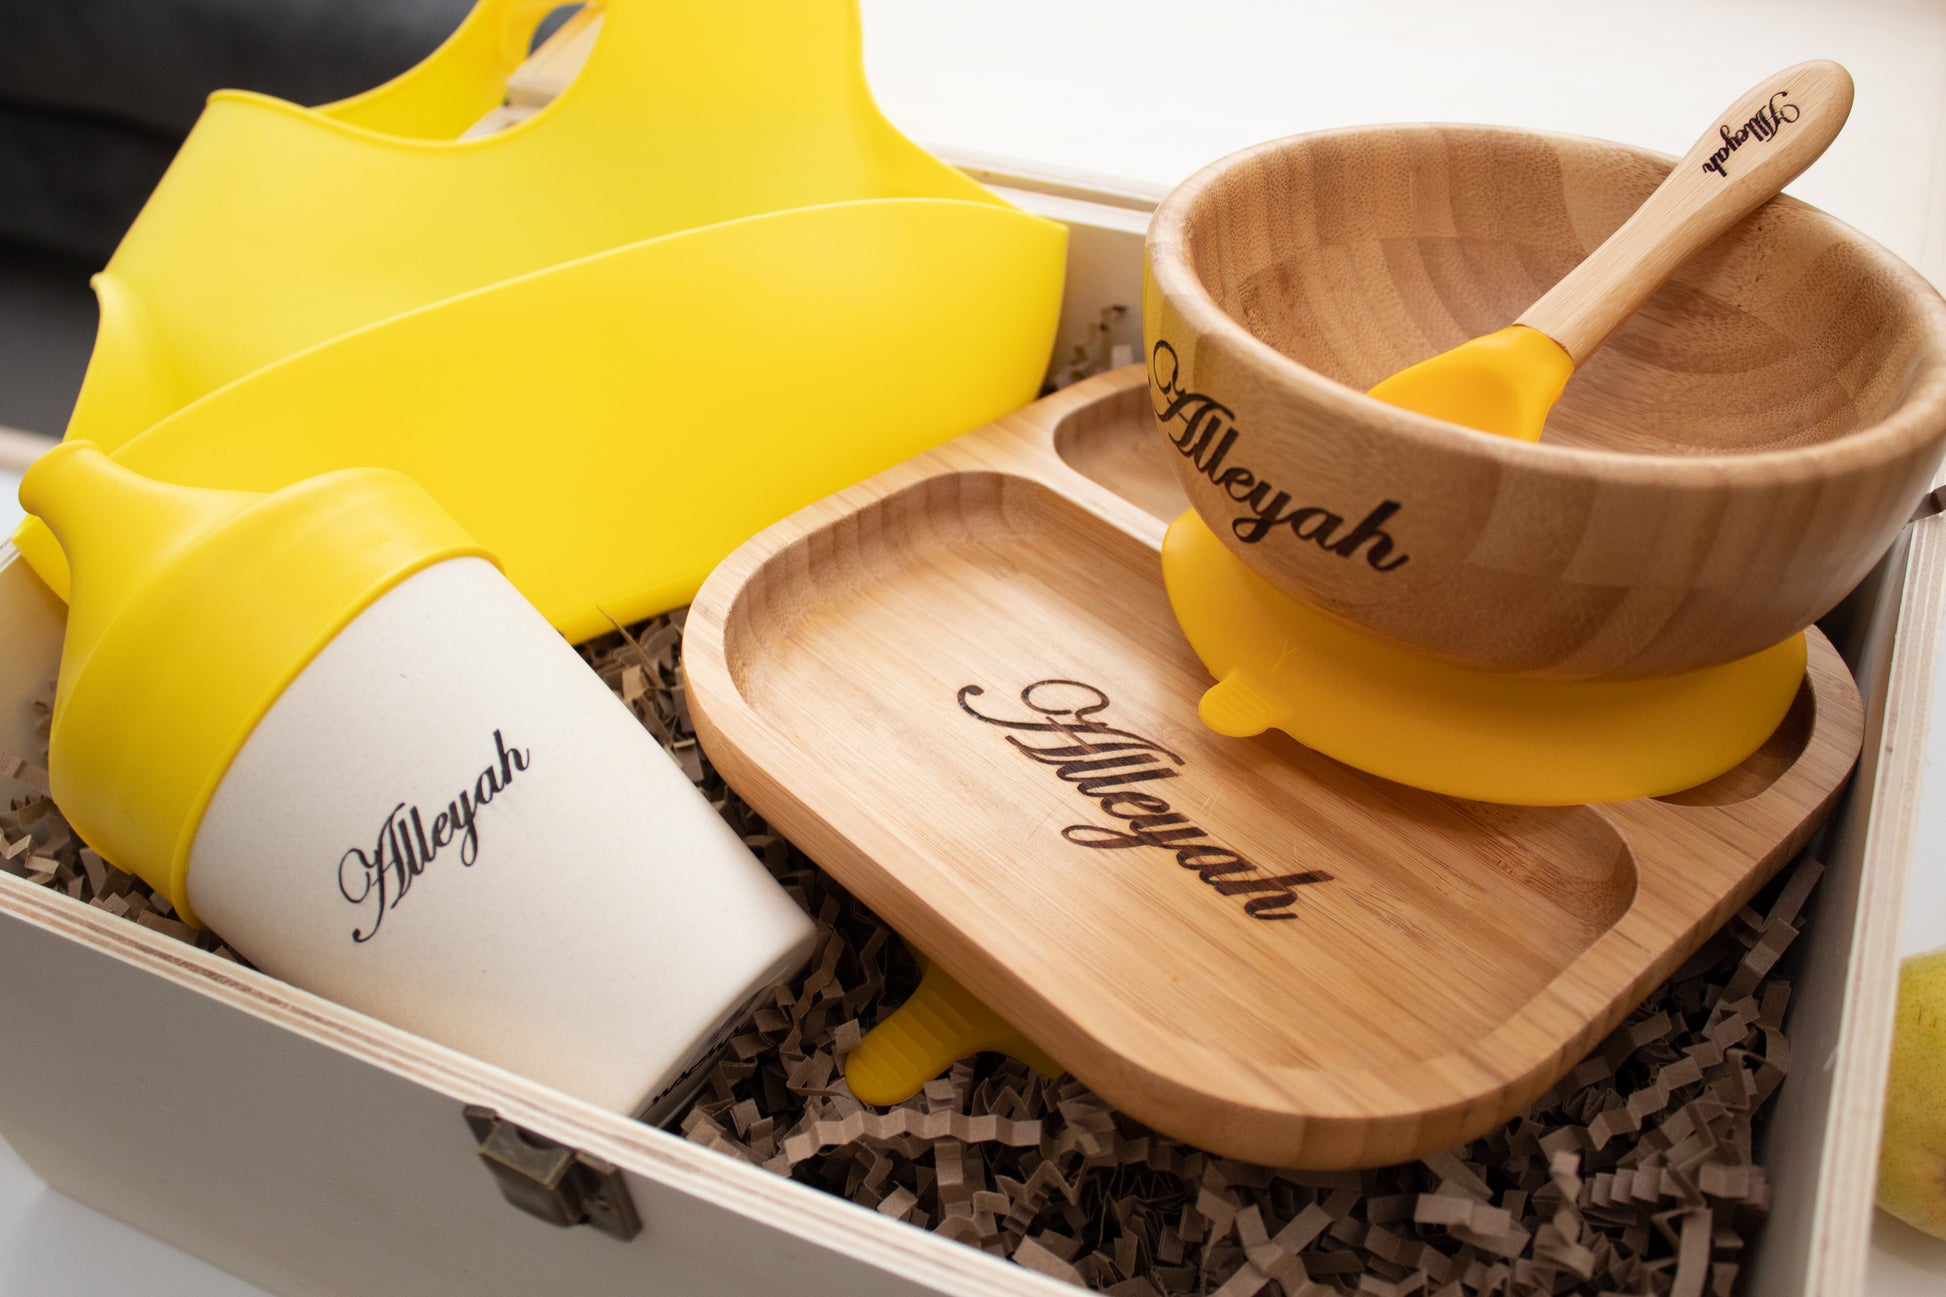 Personalised Wooden Tiny Dining Bamboo Plate, Bowl, Spoon And Babba Box  Silicon Yellow Bib and Cup - Yellow | Babba box.